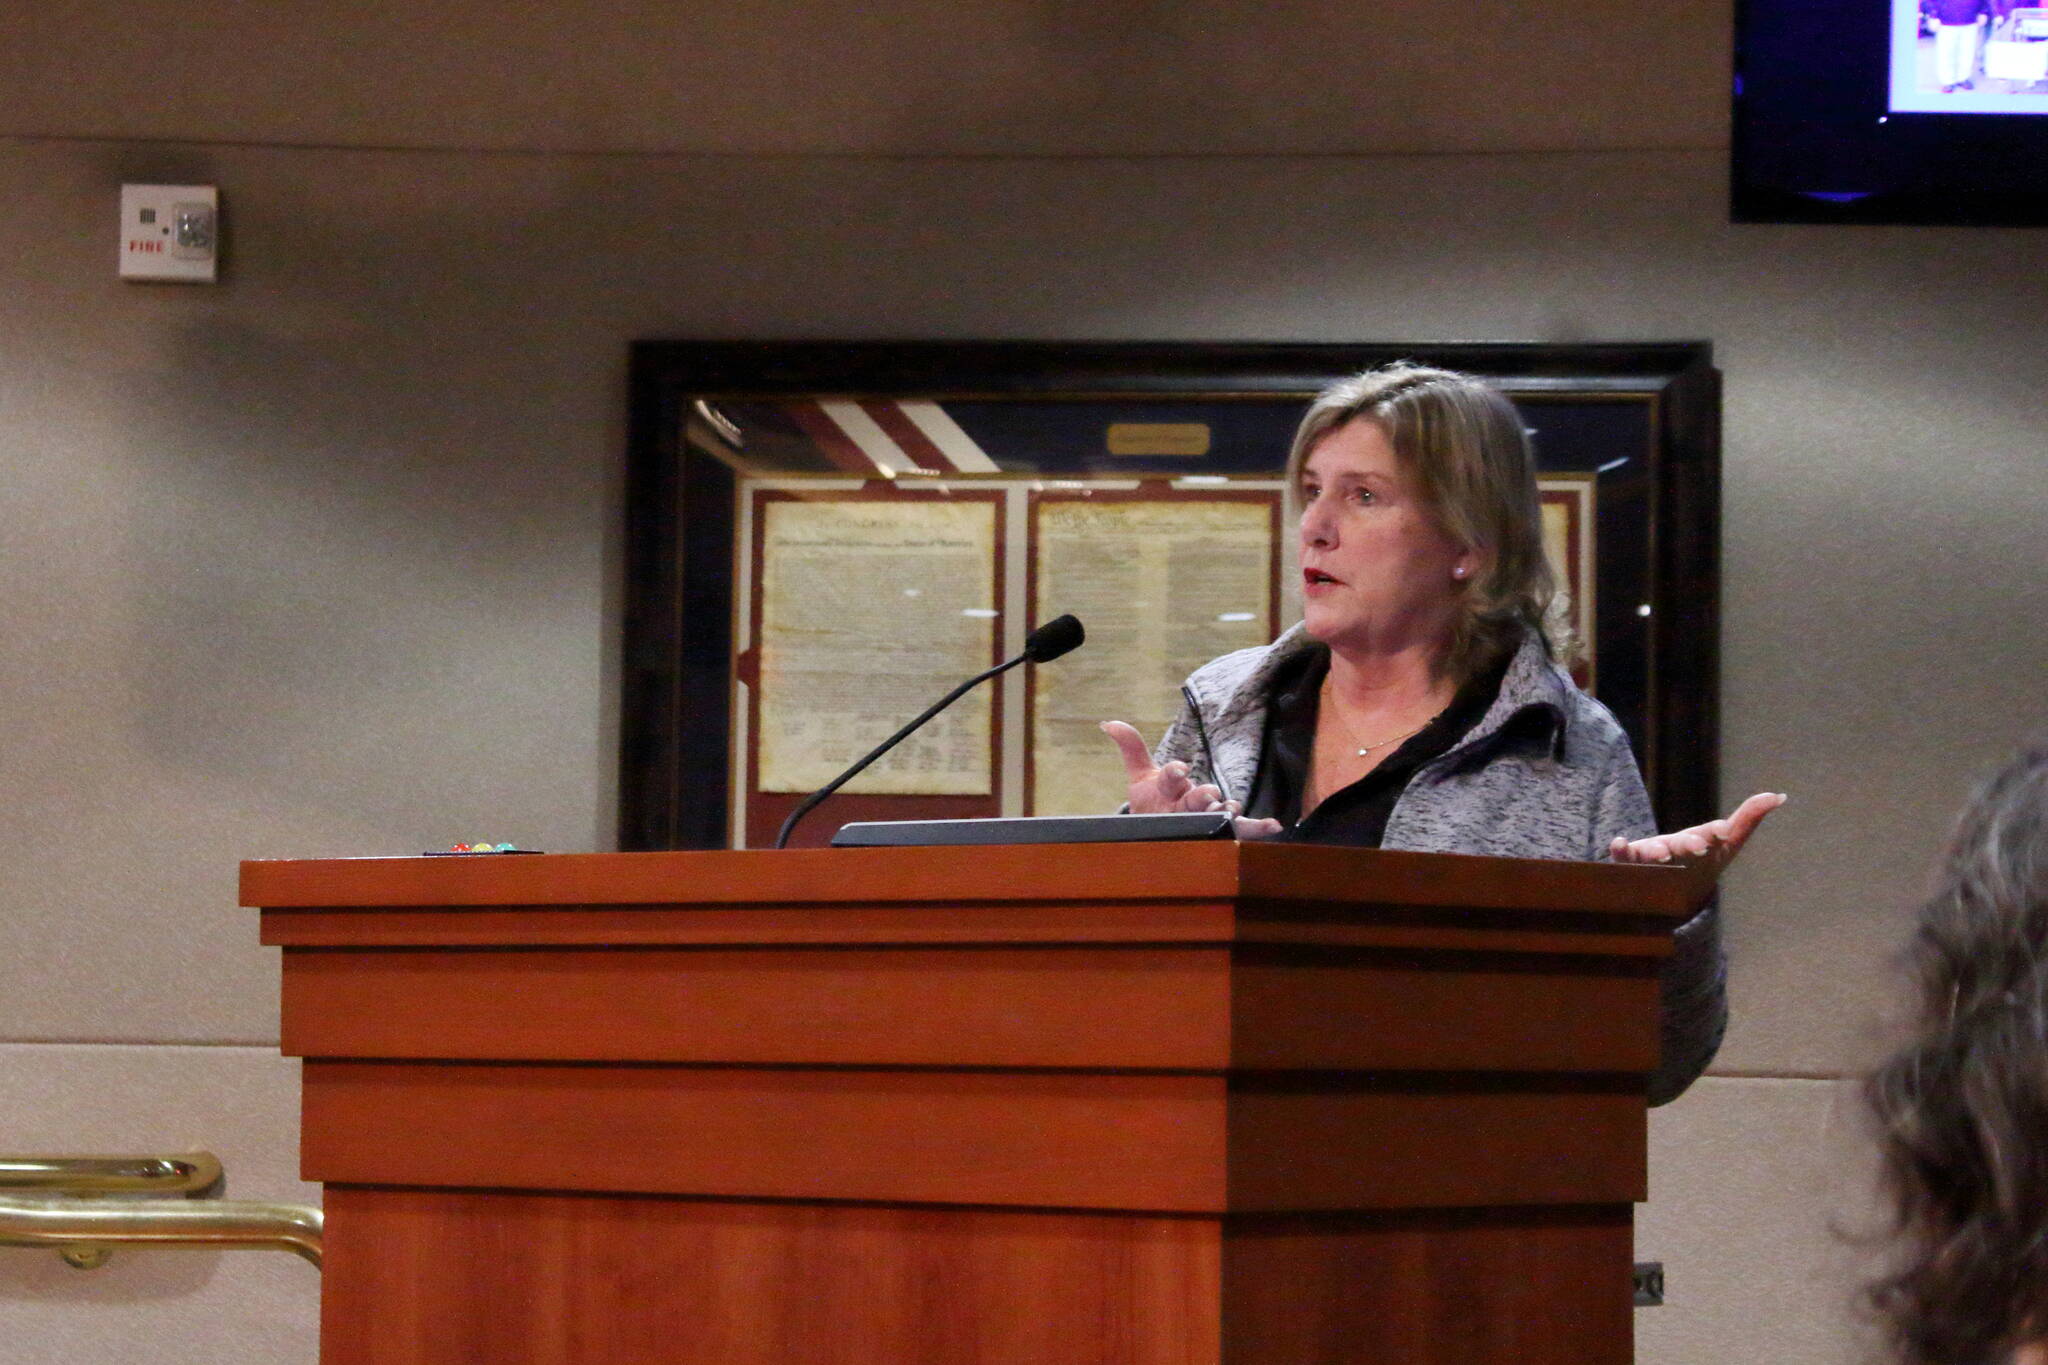 Cheryl Hurst shared exciting updates about the upcoming March for Diapers at the Federal Way City Council meeting. Photo by Keelin Everly-Lang/The Mirror